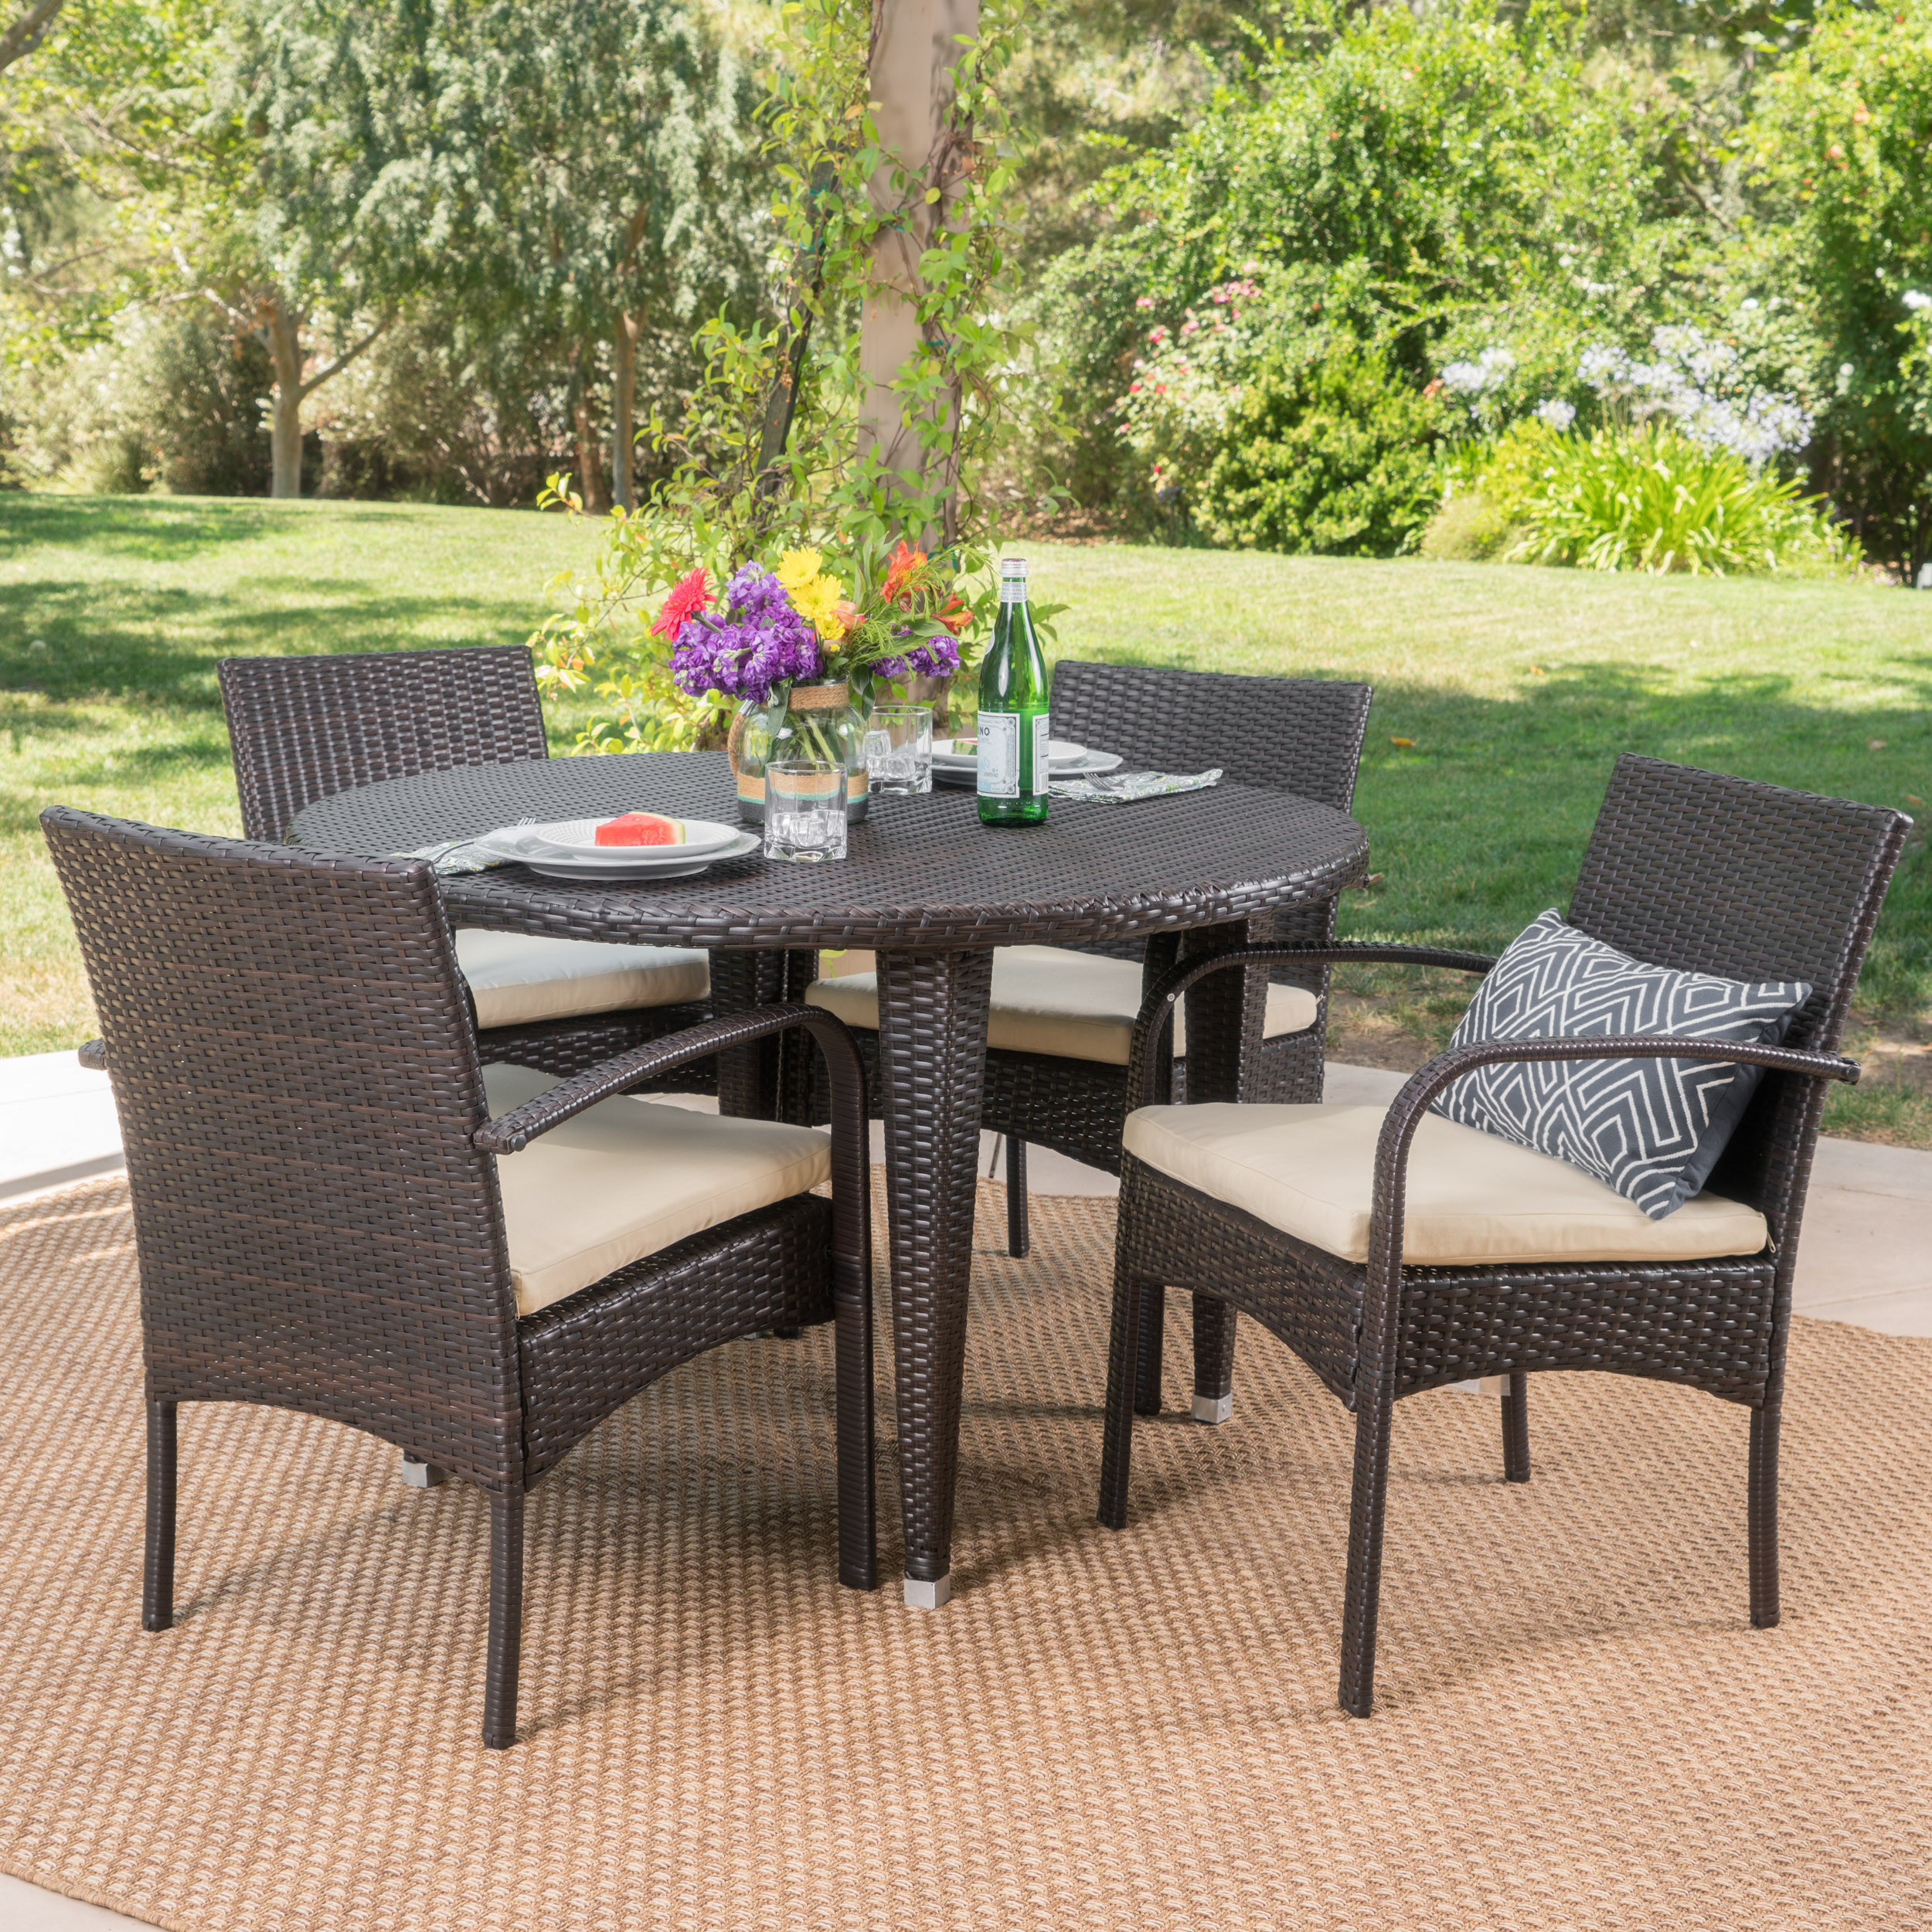 Cole Outdoor 5 Piece Wicker Circular Dining Set with Cushions